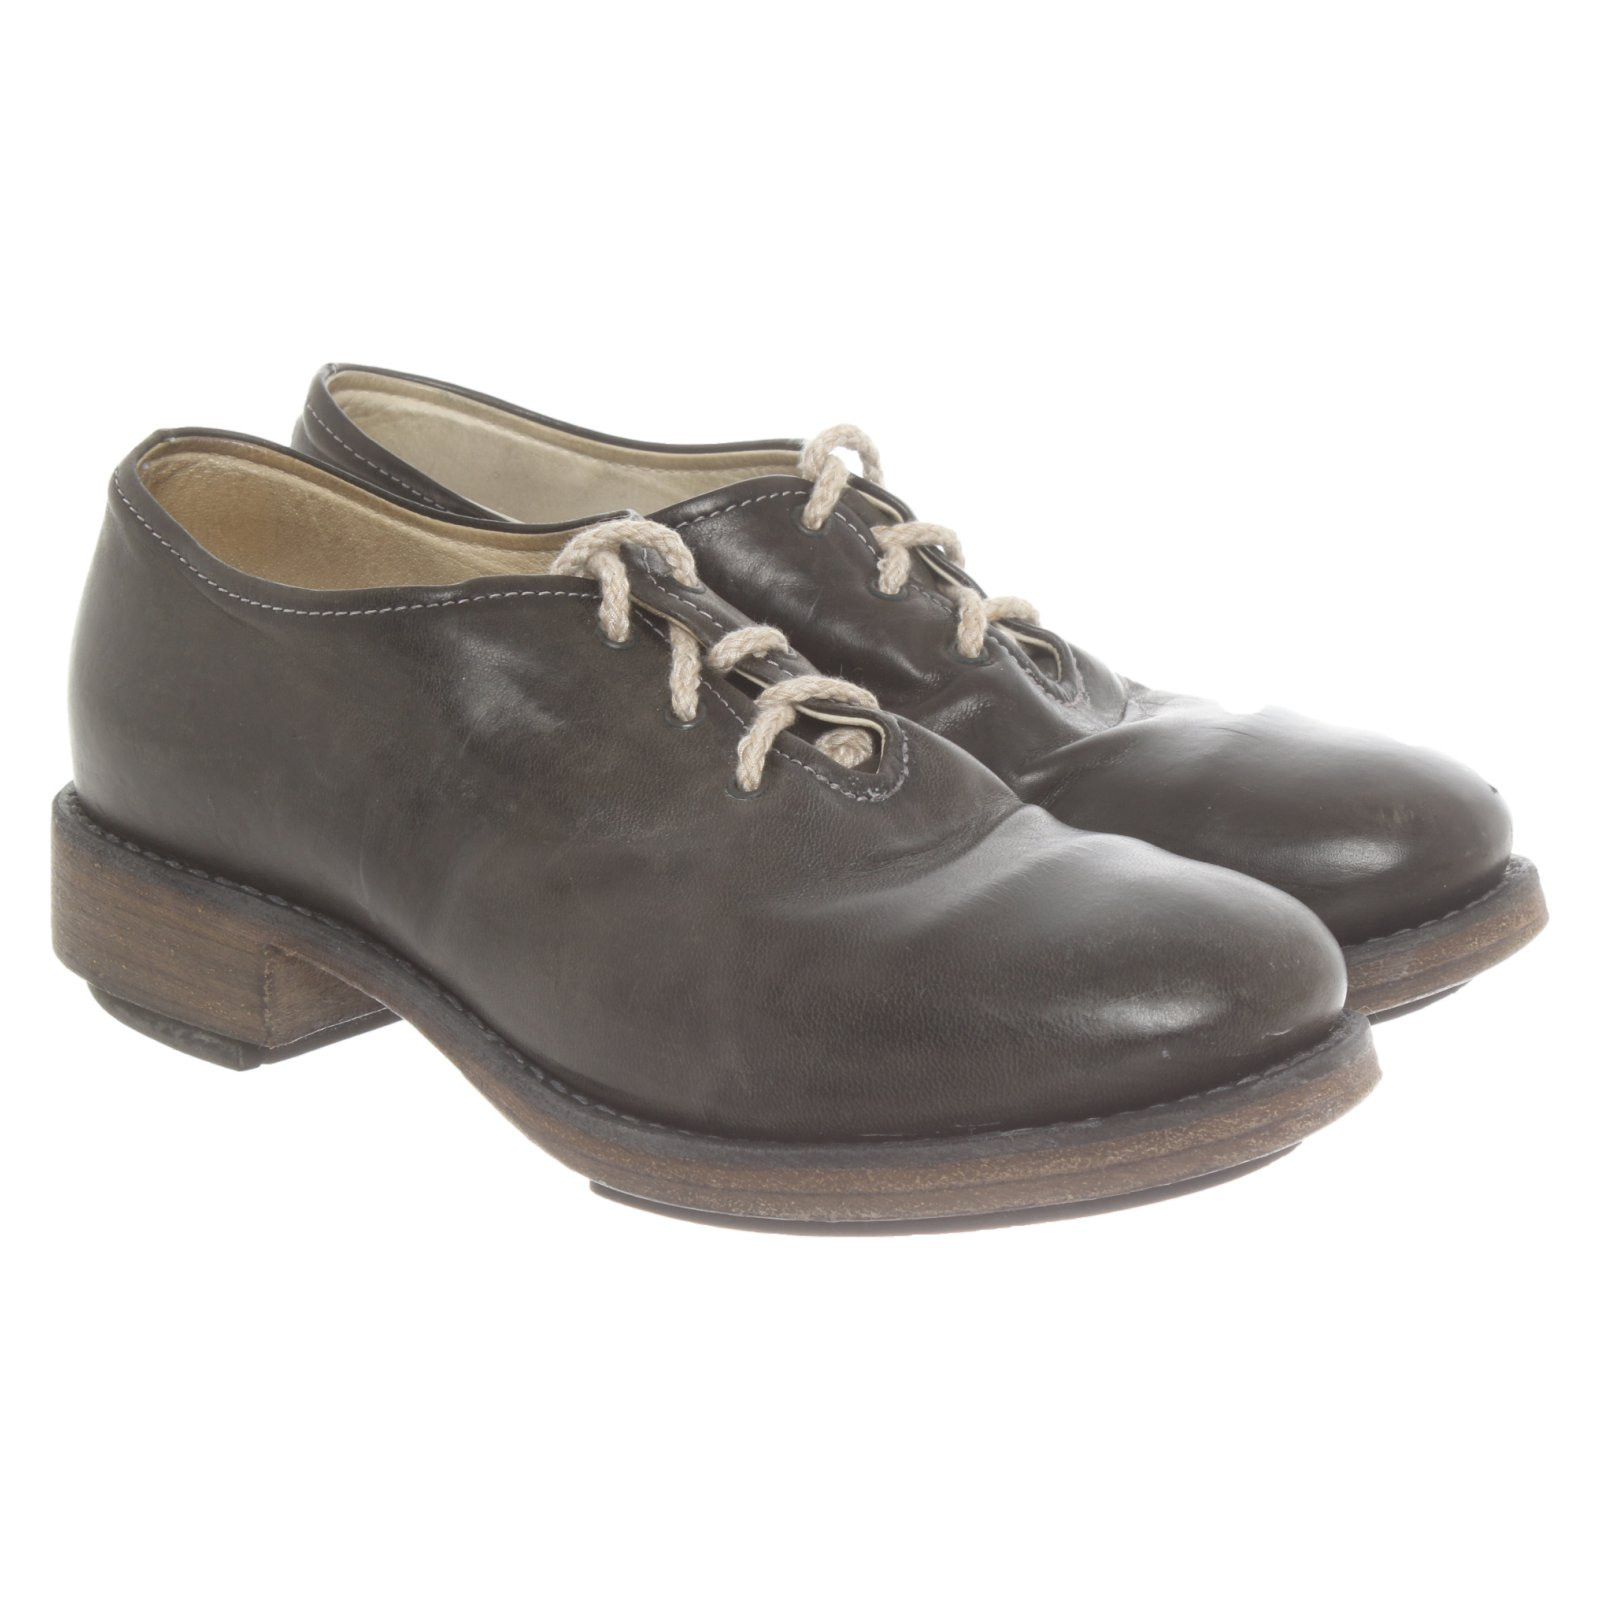 Cherevichkiotvichki Lace Up Shoes Leather In Grey Second Hand Cherevichkiotvichki Lace Up Shoes Leather In Grey Buy Used For 98